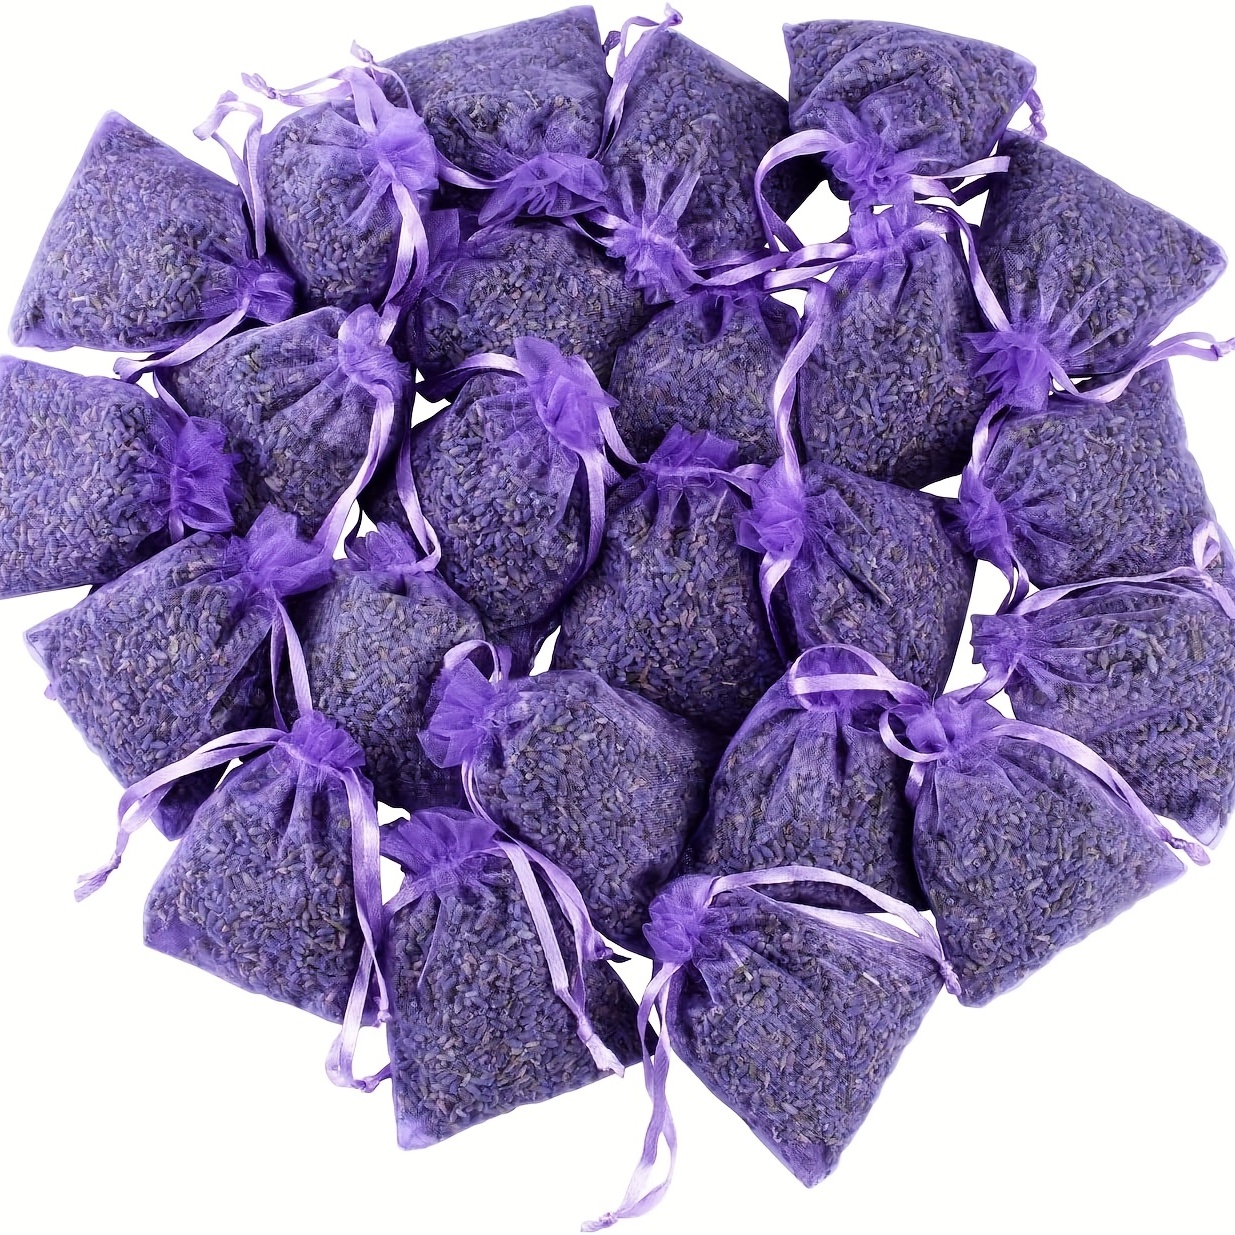 Bag of 50 Sachets Dried Lavender Flower Lavender Sachets for Drawers and Closets, LV-S-B-50